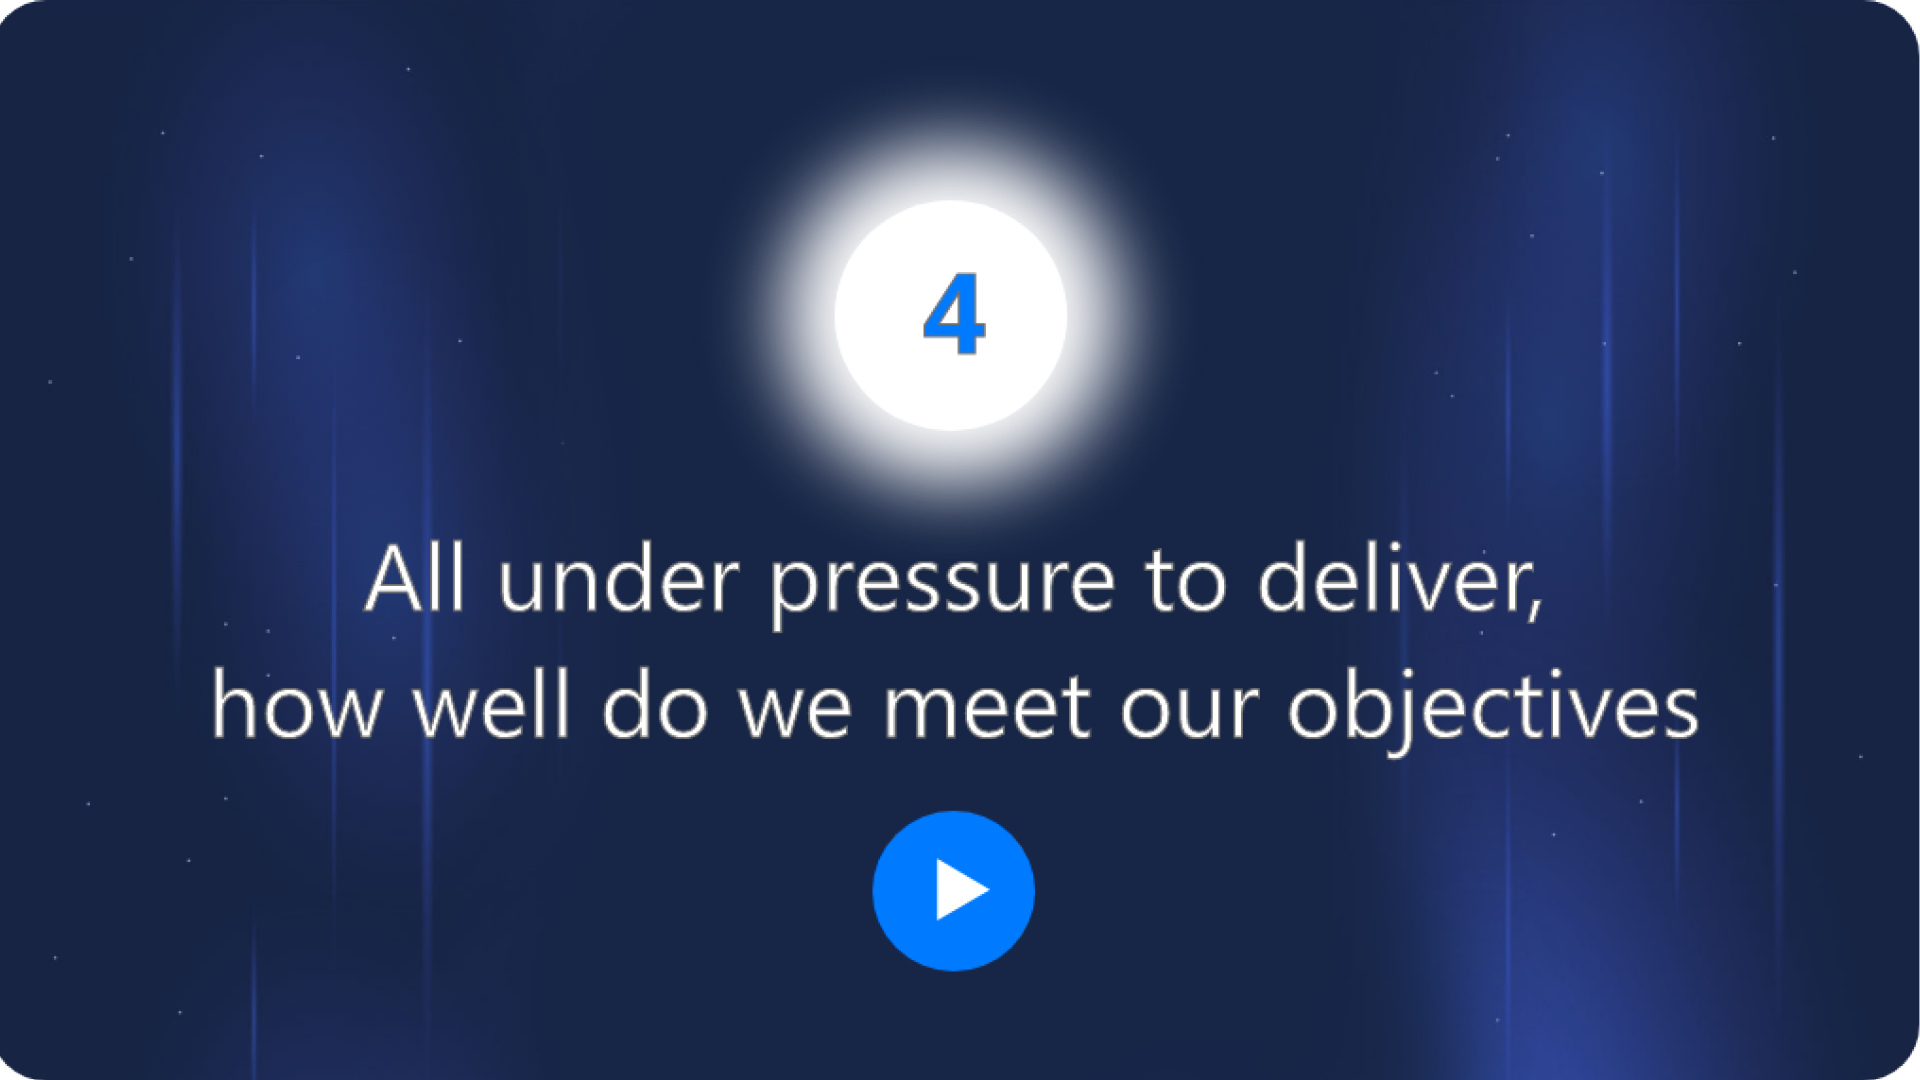 All under pressure to deliver, how well do we meet our objectives